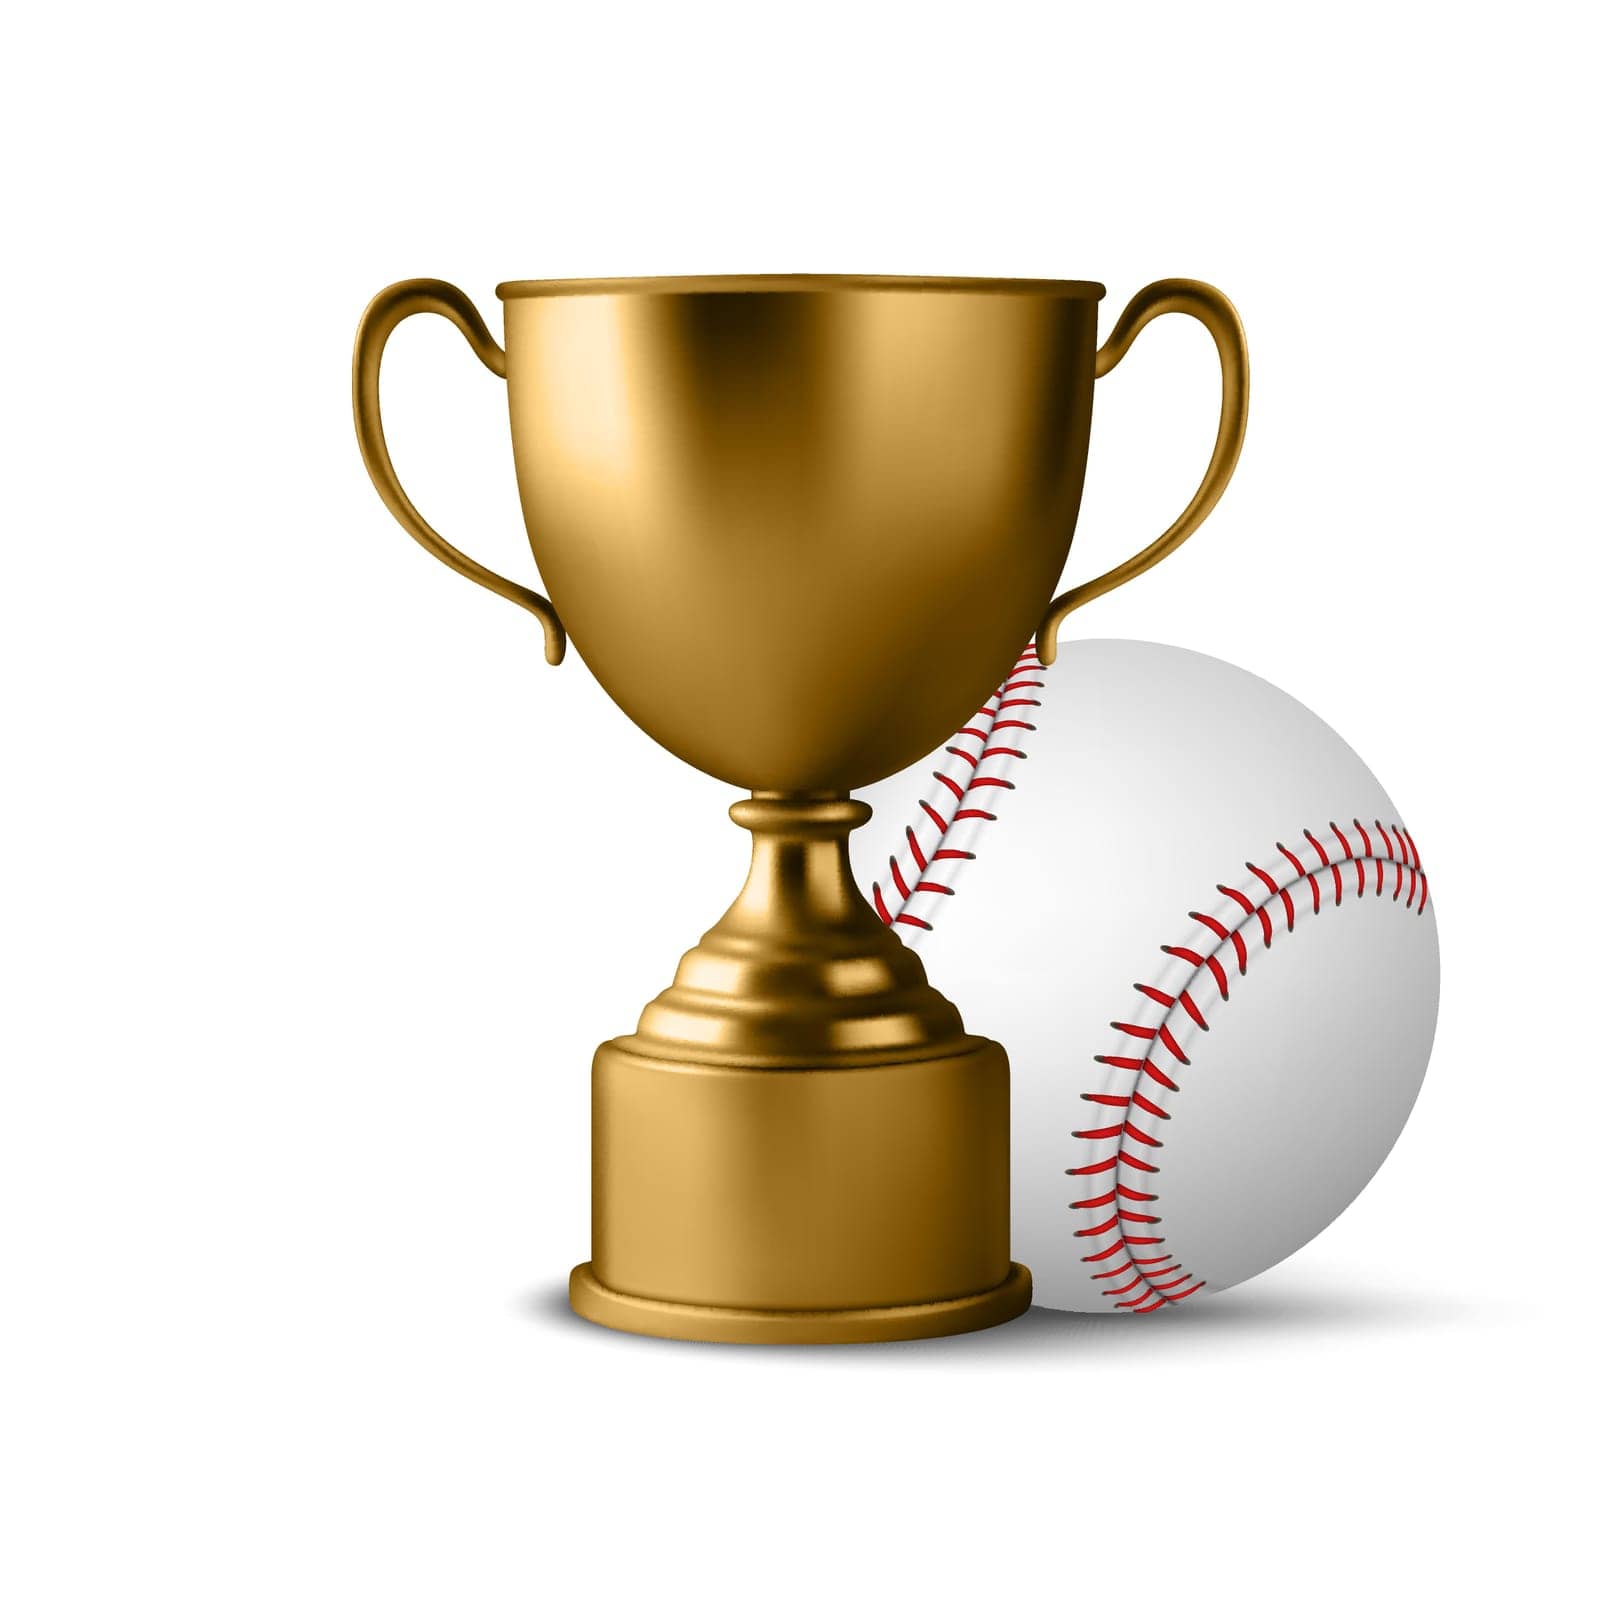 Vector 3d Realistic Metal Yellow Golden Champion Cup and Baseball Set, Isolated. Championship Trophy Design Template for Sports Concept, Front View by Gomolach